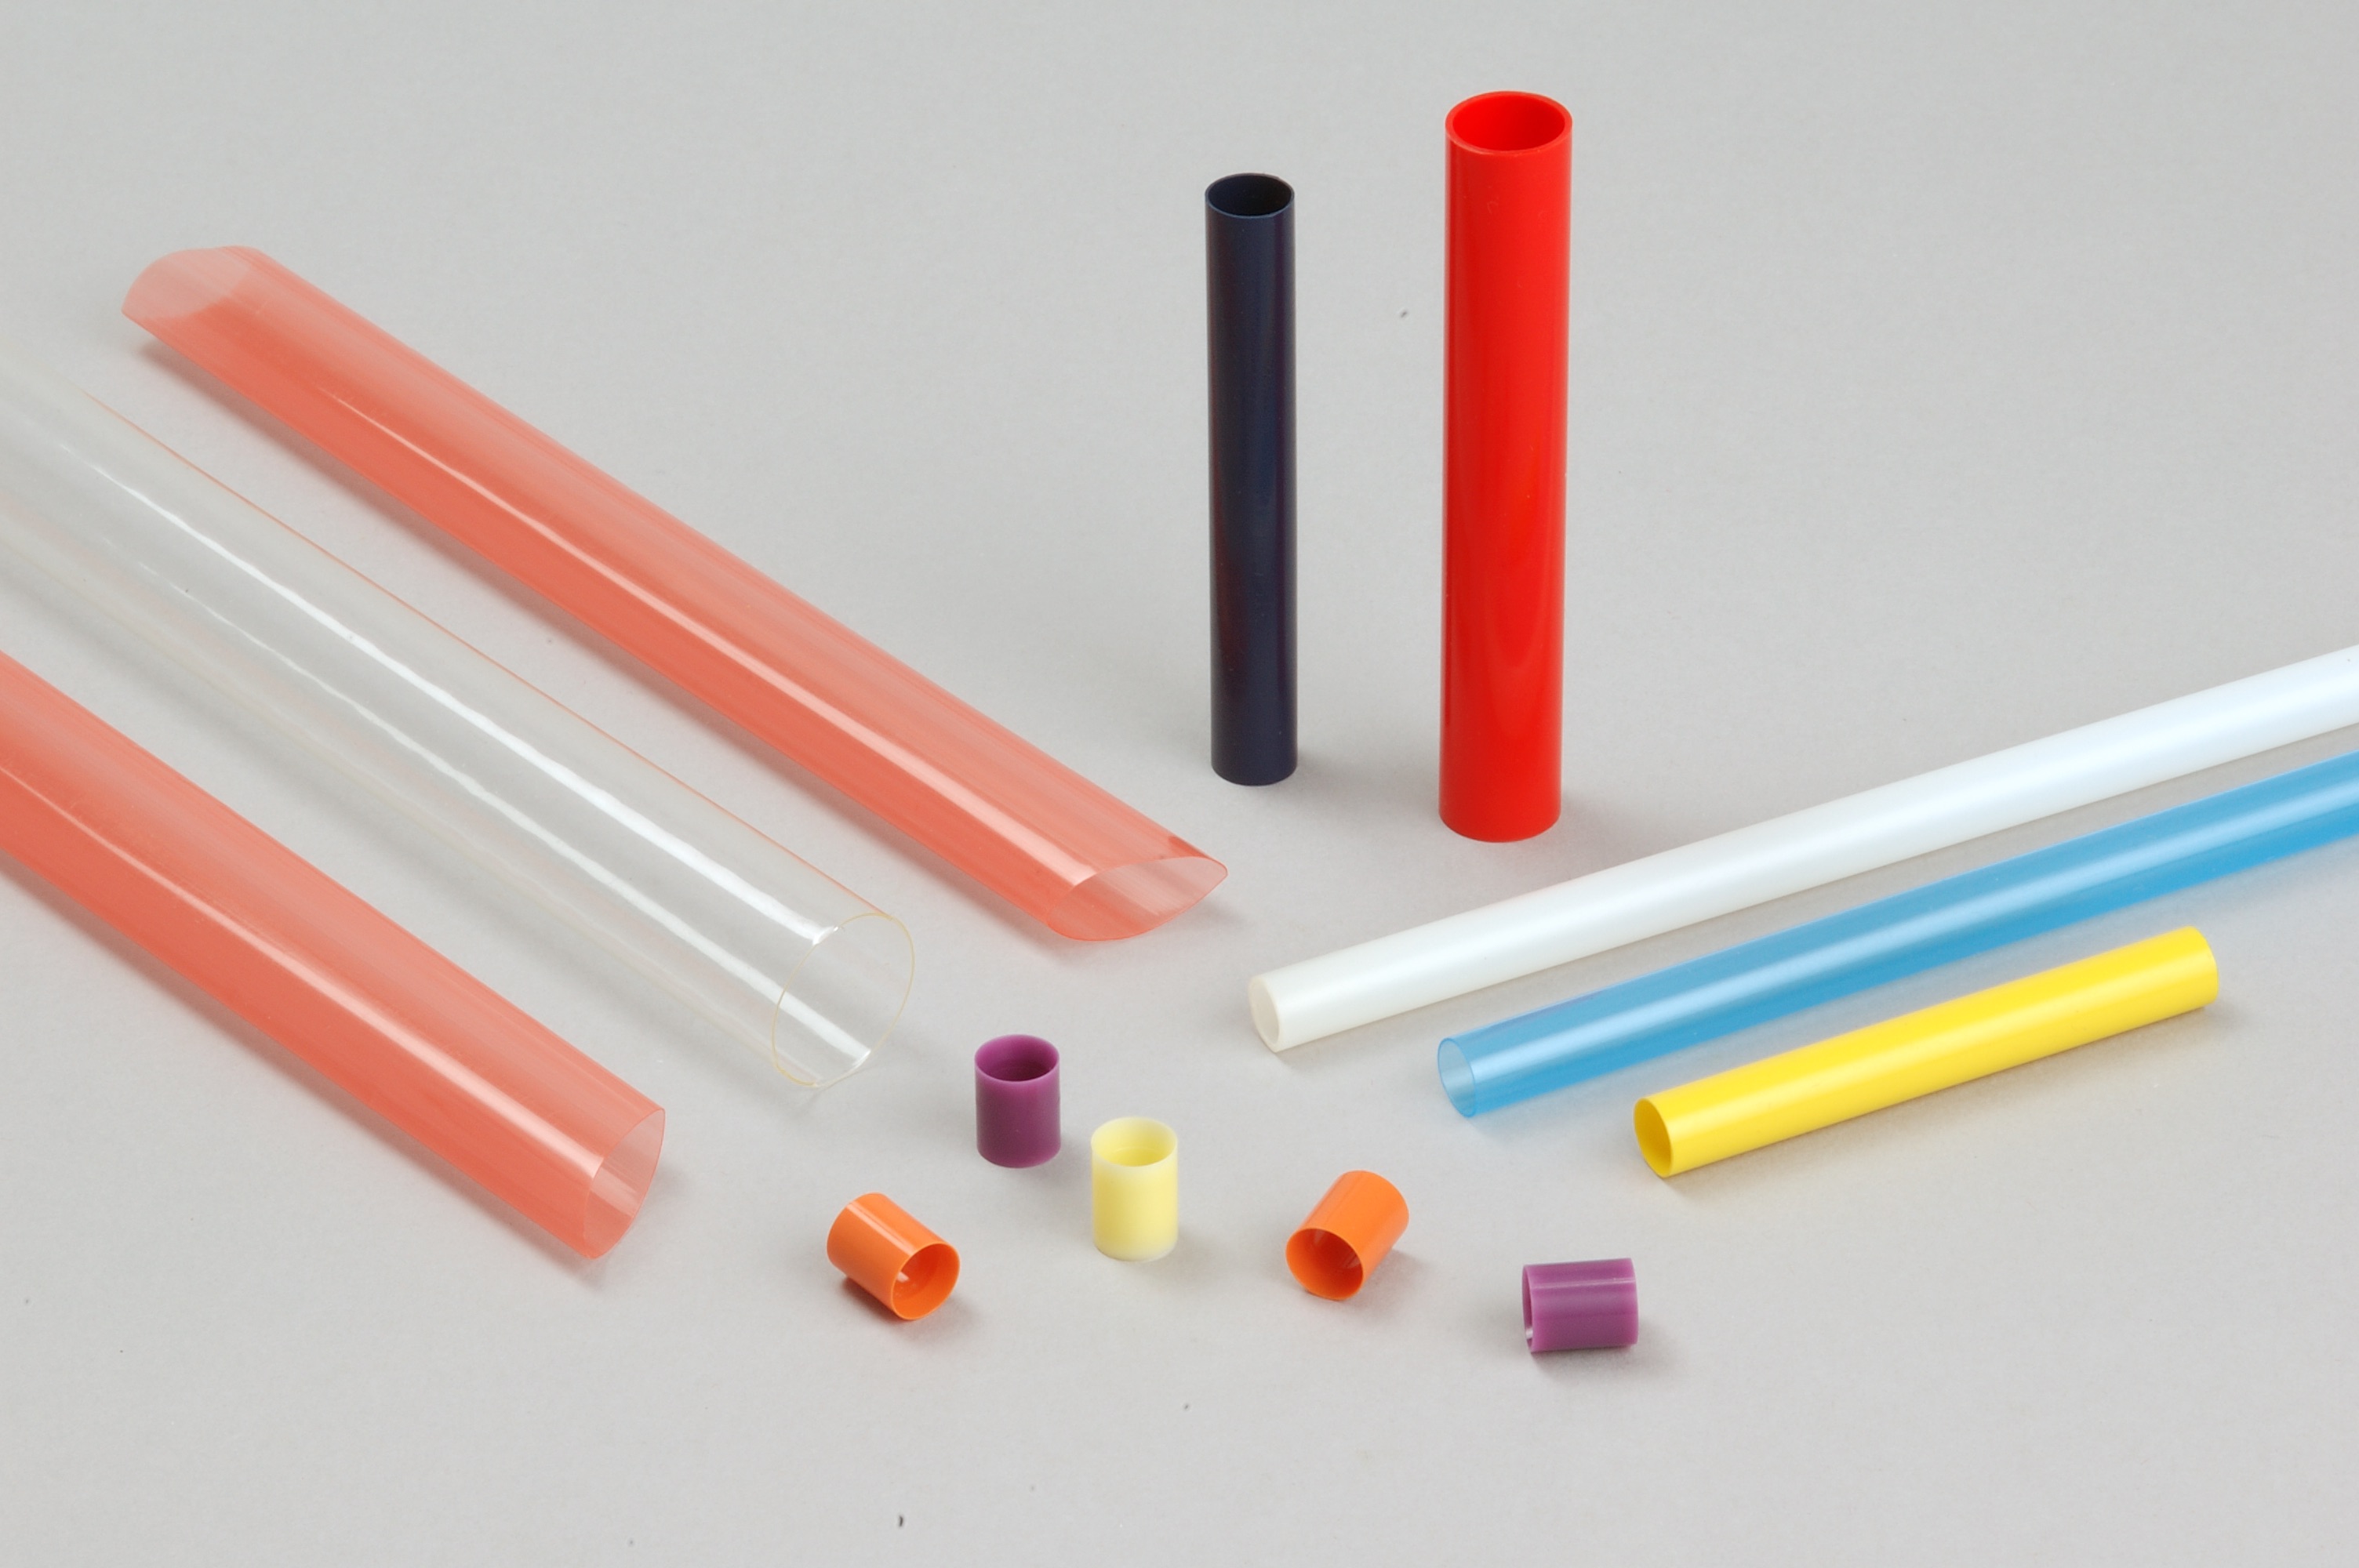 Extruded Tubing